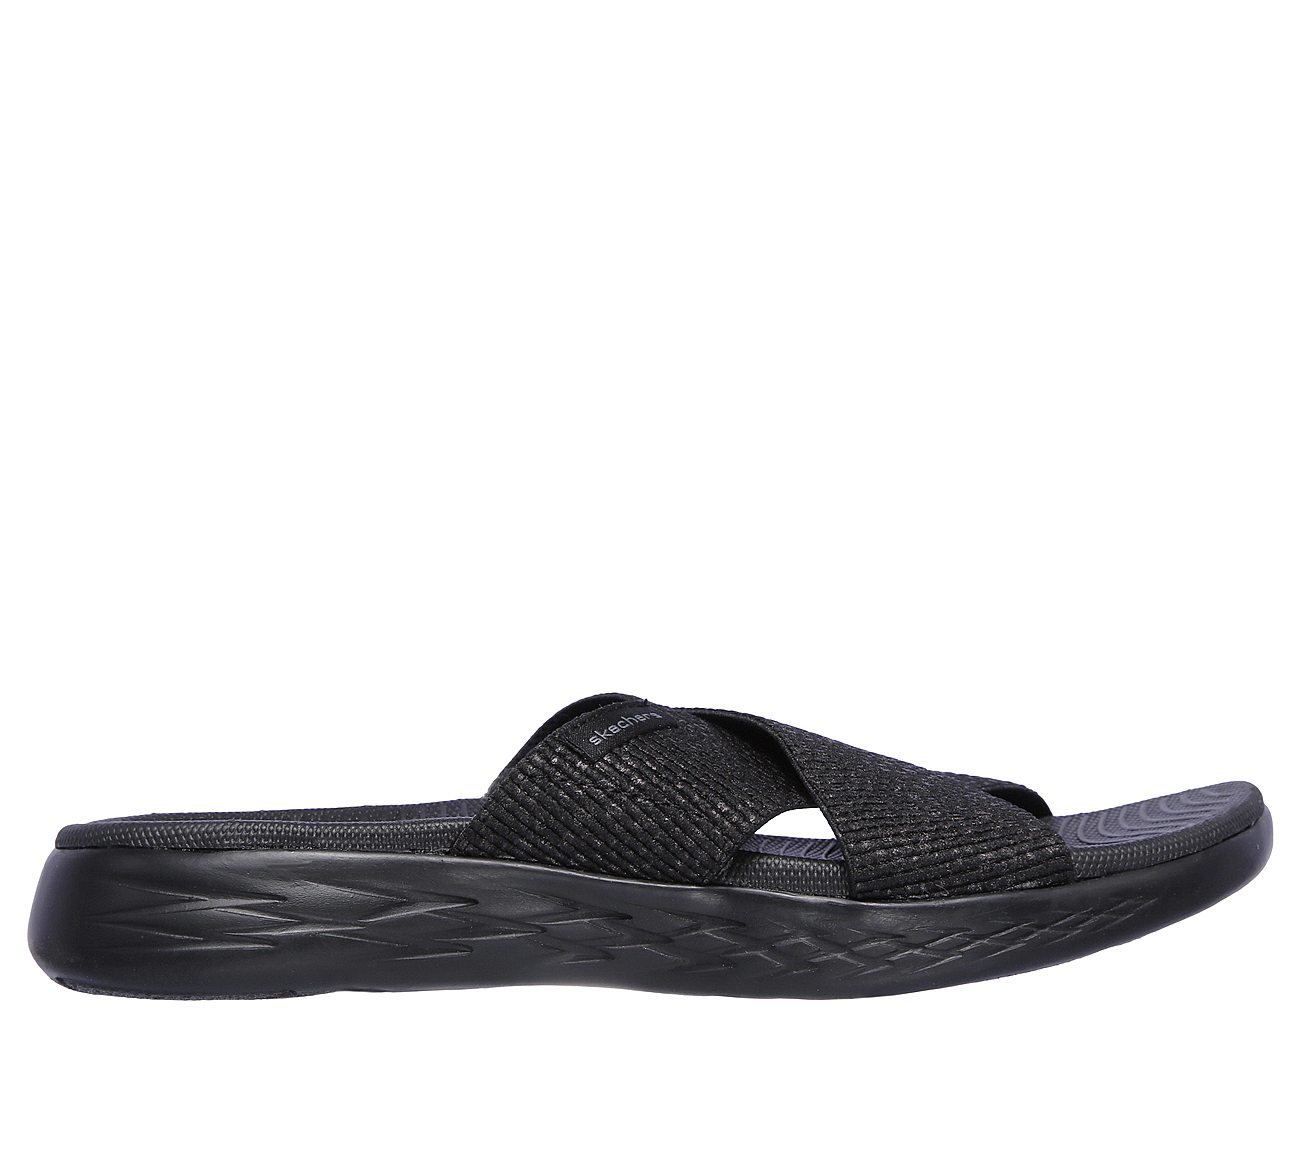 skechers performance on the go sandals